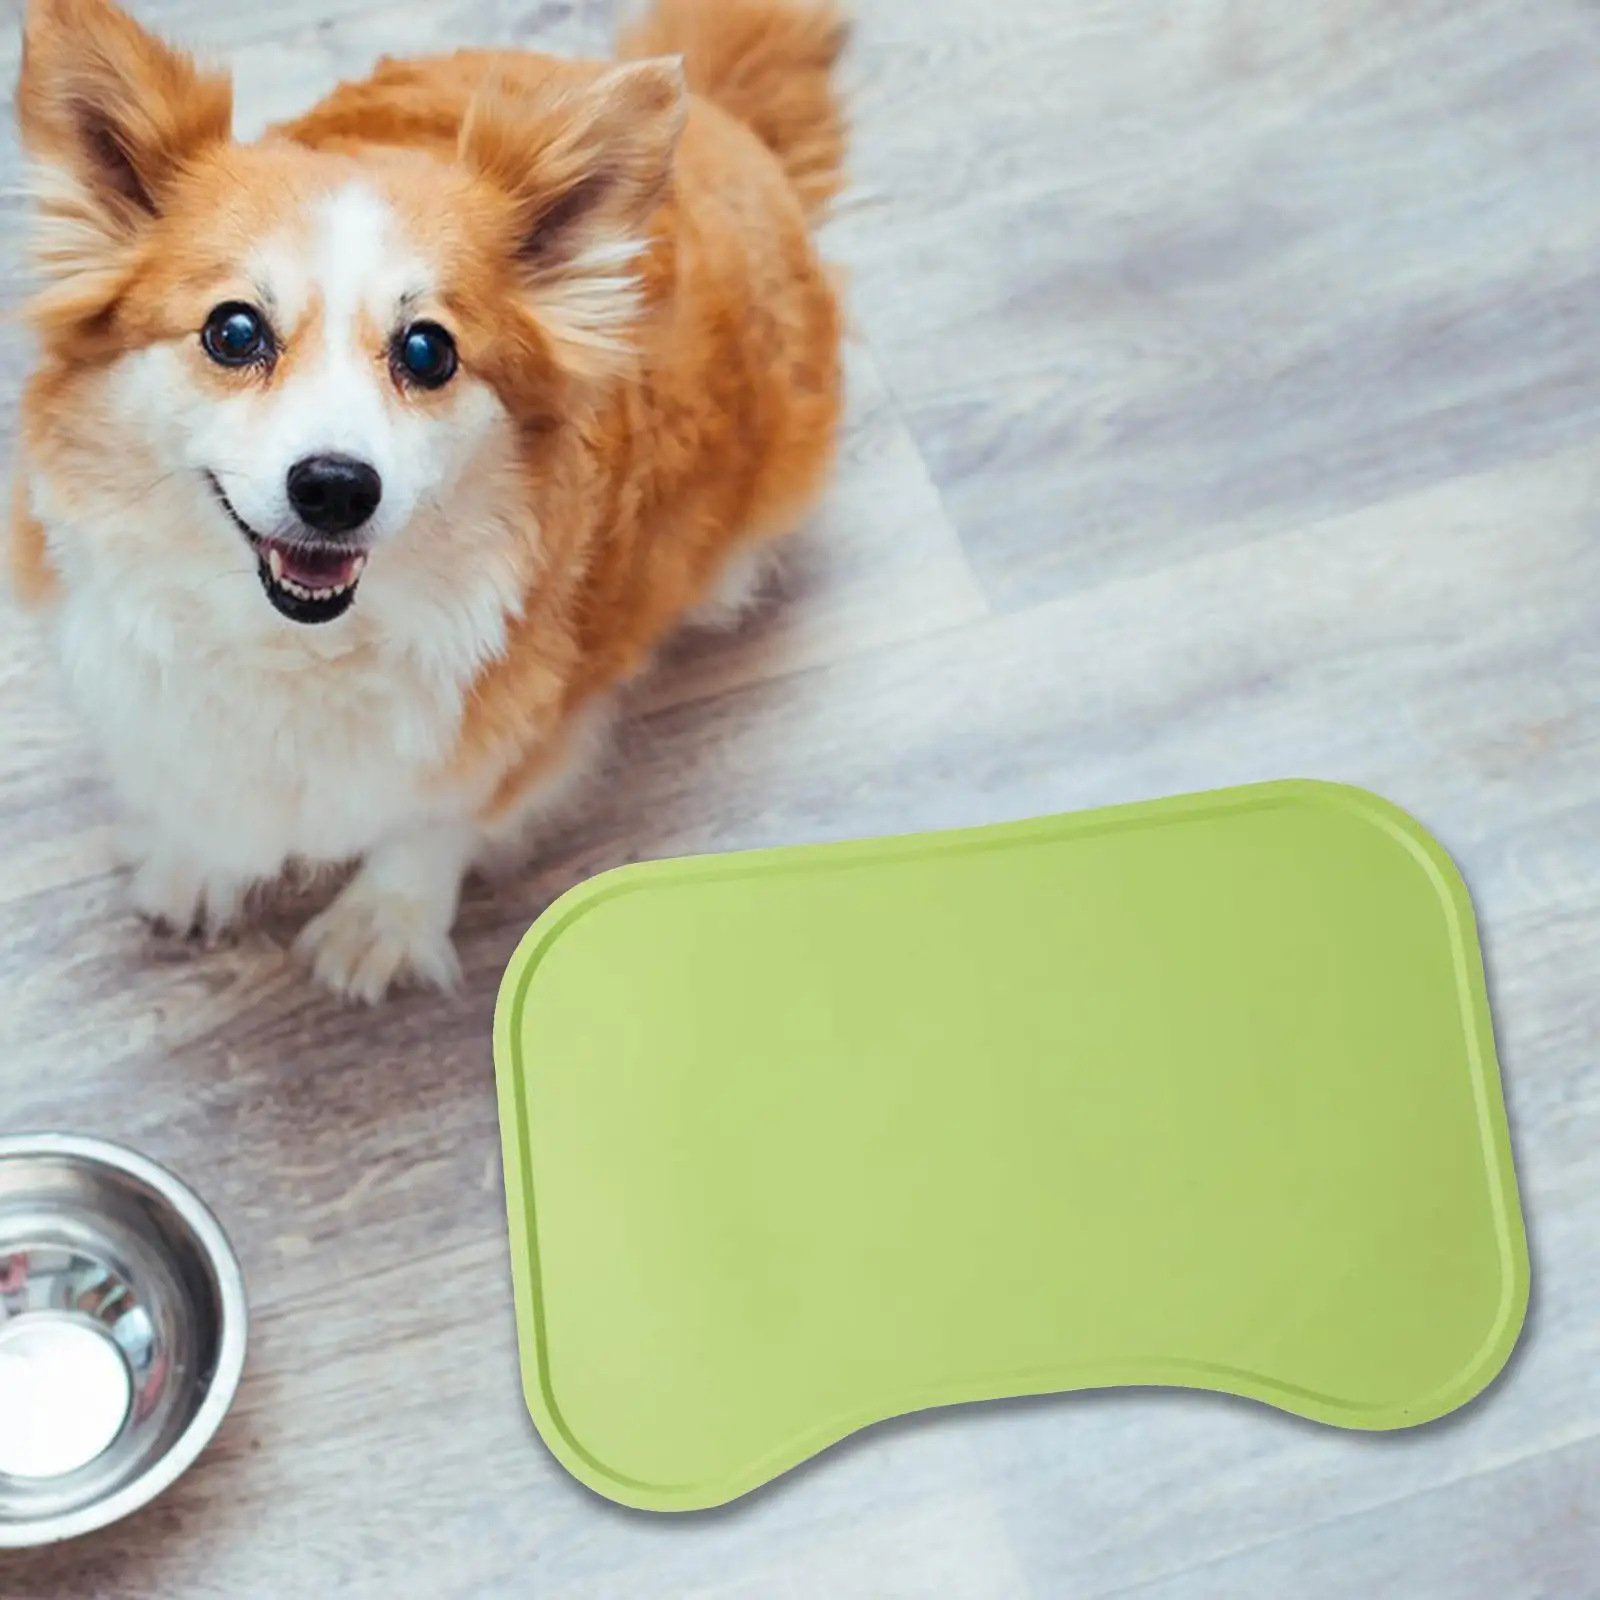 Pet Dog Food Mat, Cat Placemat Feeding Mat Dish Tray Pad, Waterproof with Raised Edges Non Slip for Dogs and Cats